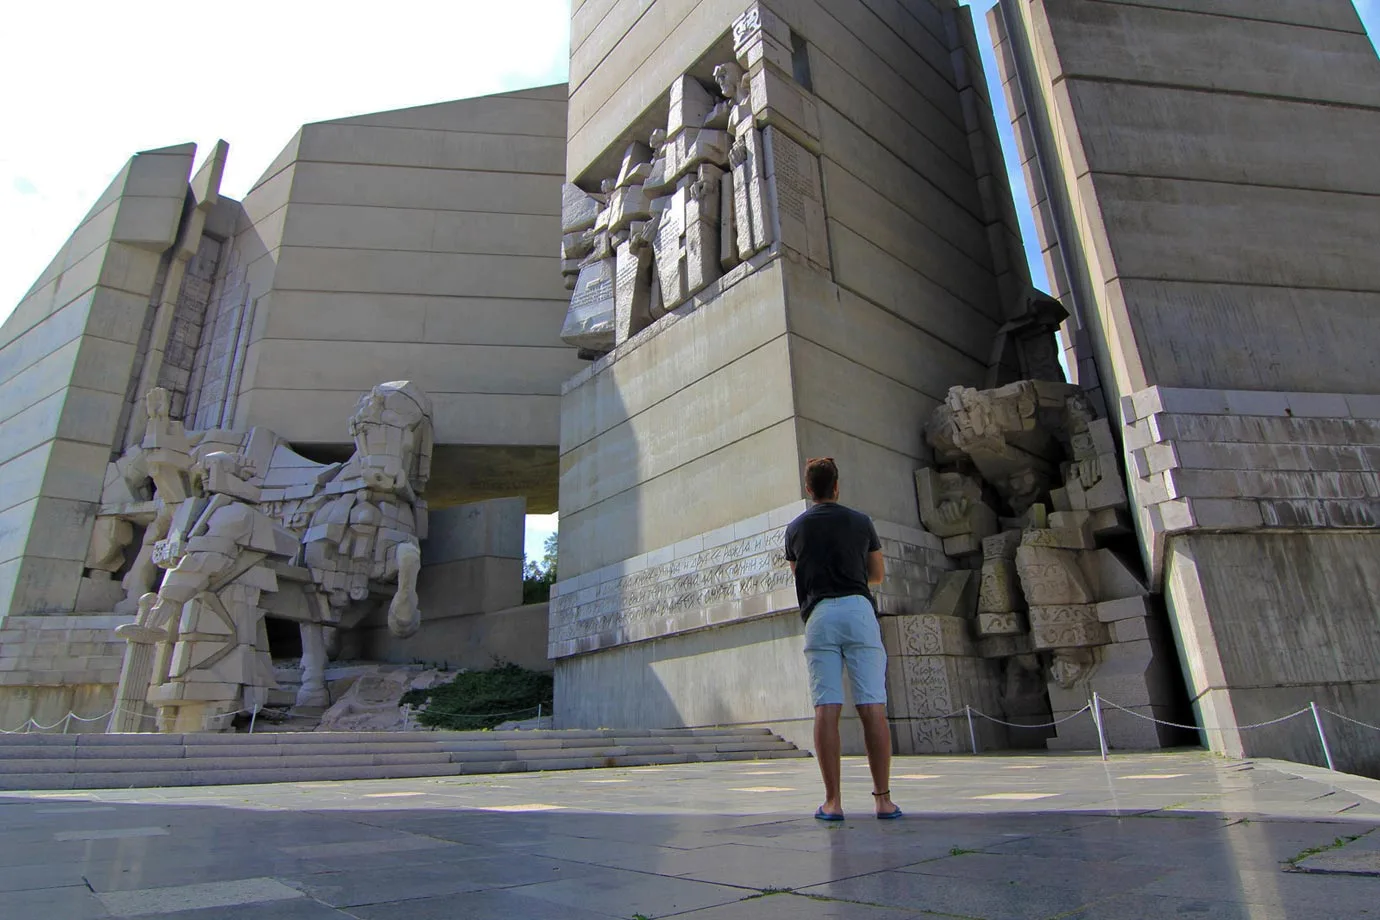 The monument at Shumen is absolutely huge and all the statues tower over you